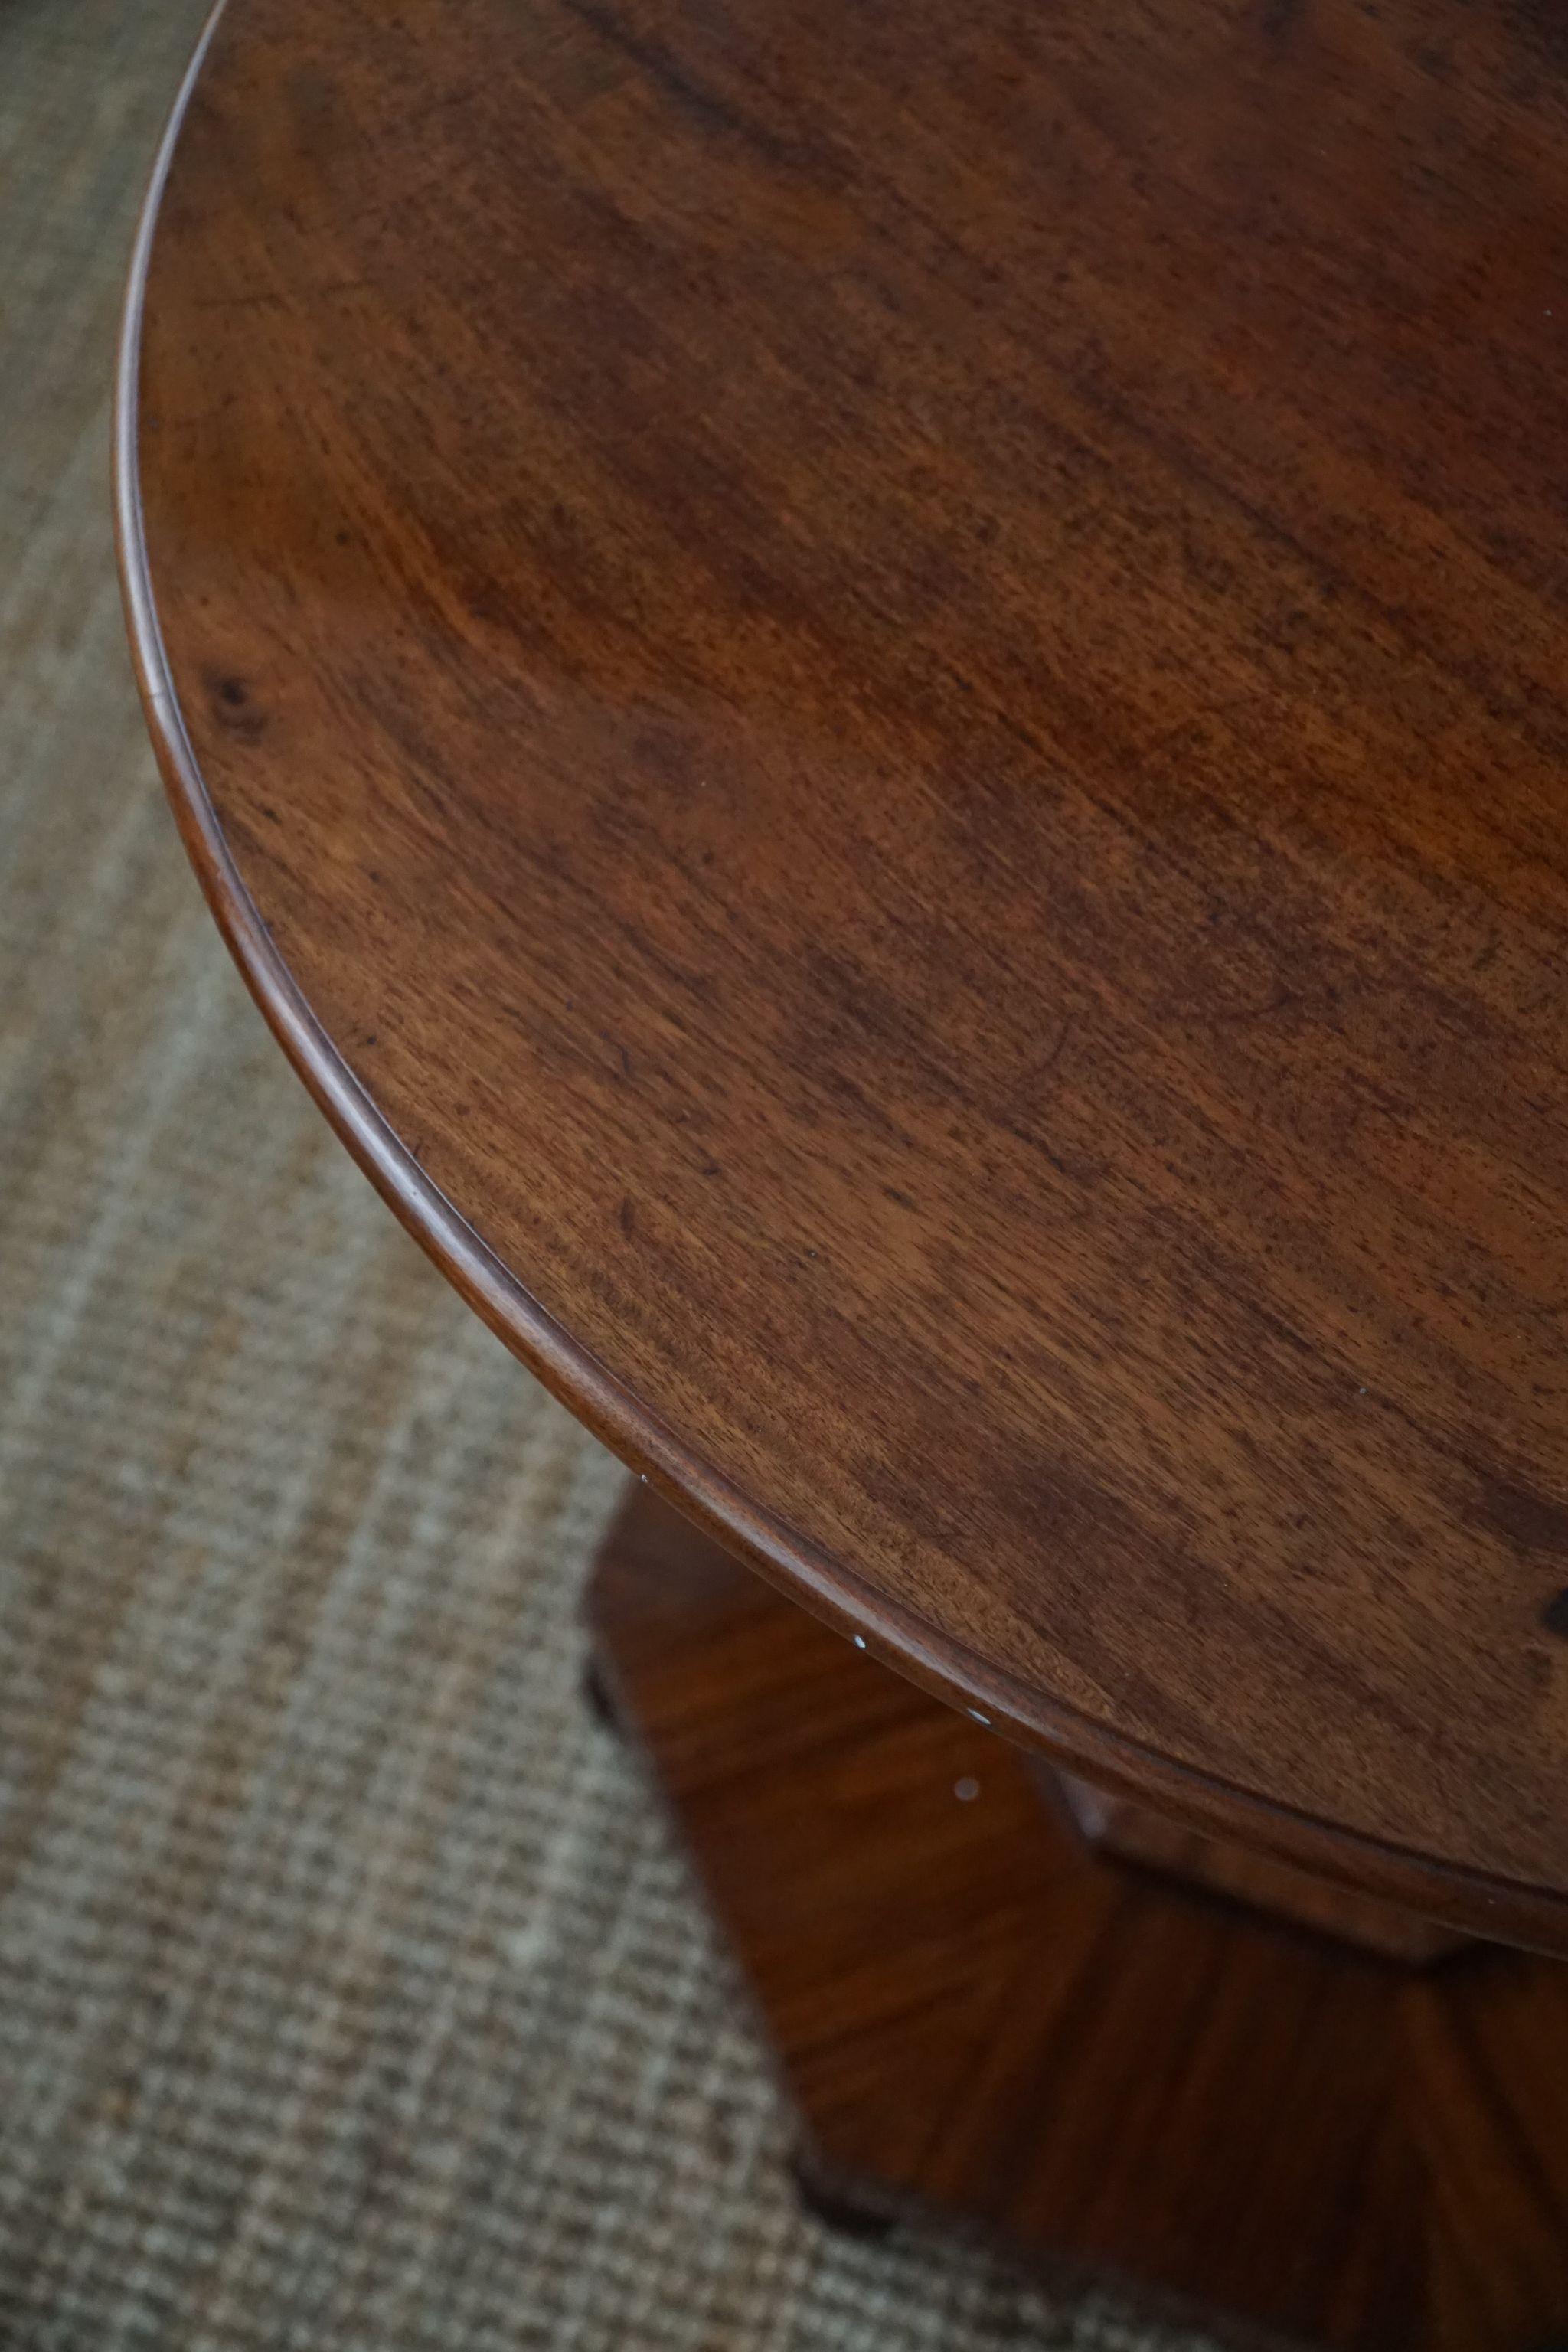 Art Deco, Round Pedestal / Side Table in Walnut, By a Danish Cabinetmaker, 1940s For Sale 8